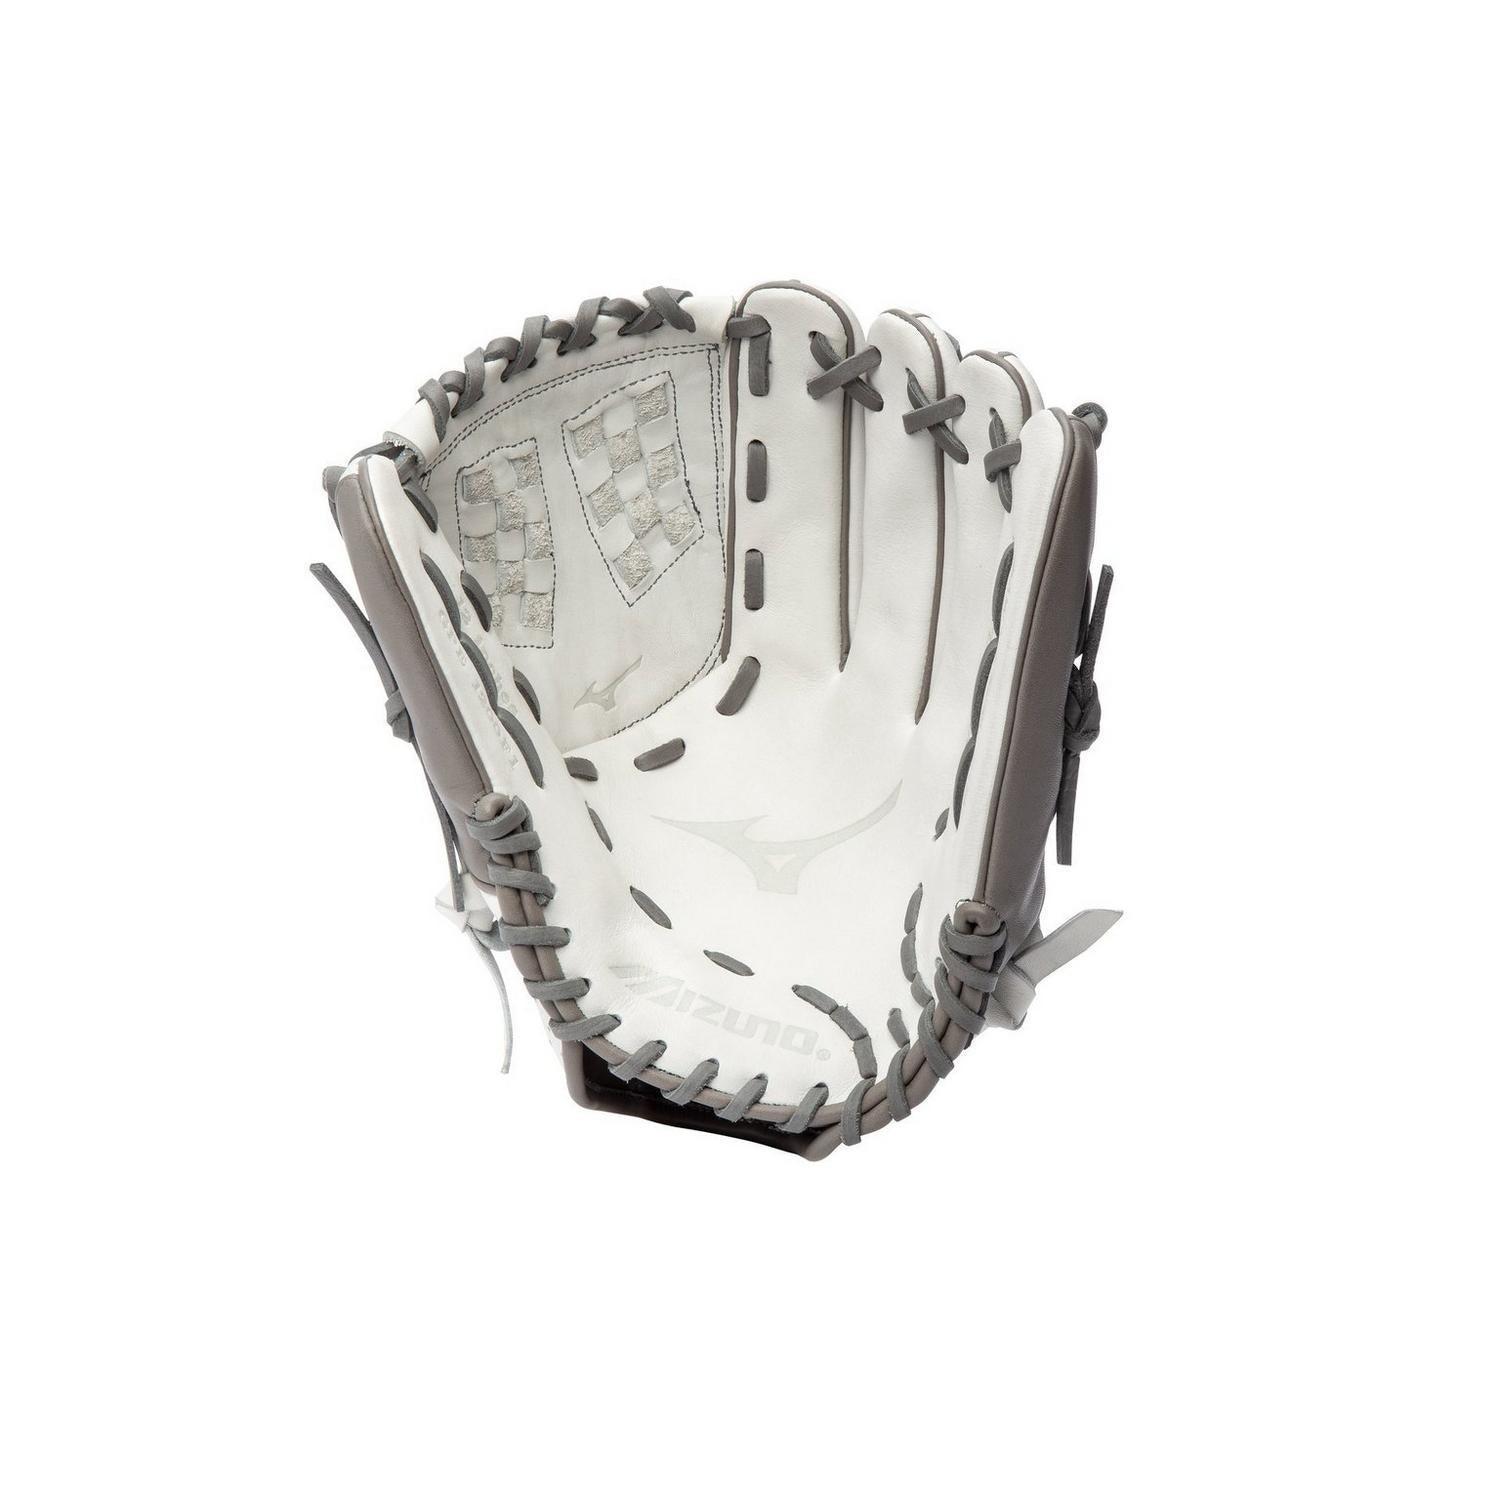 Prime Elite Pitcher Fastpitch Softball Glove 12" - Sports Excellence